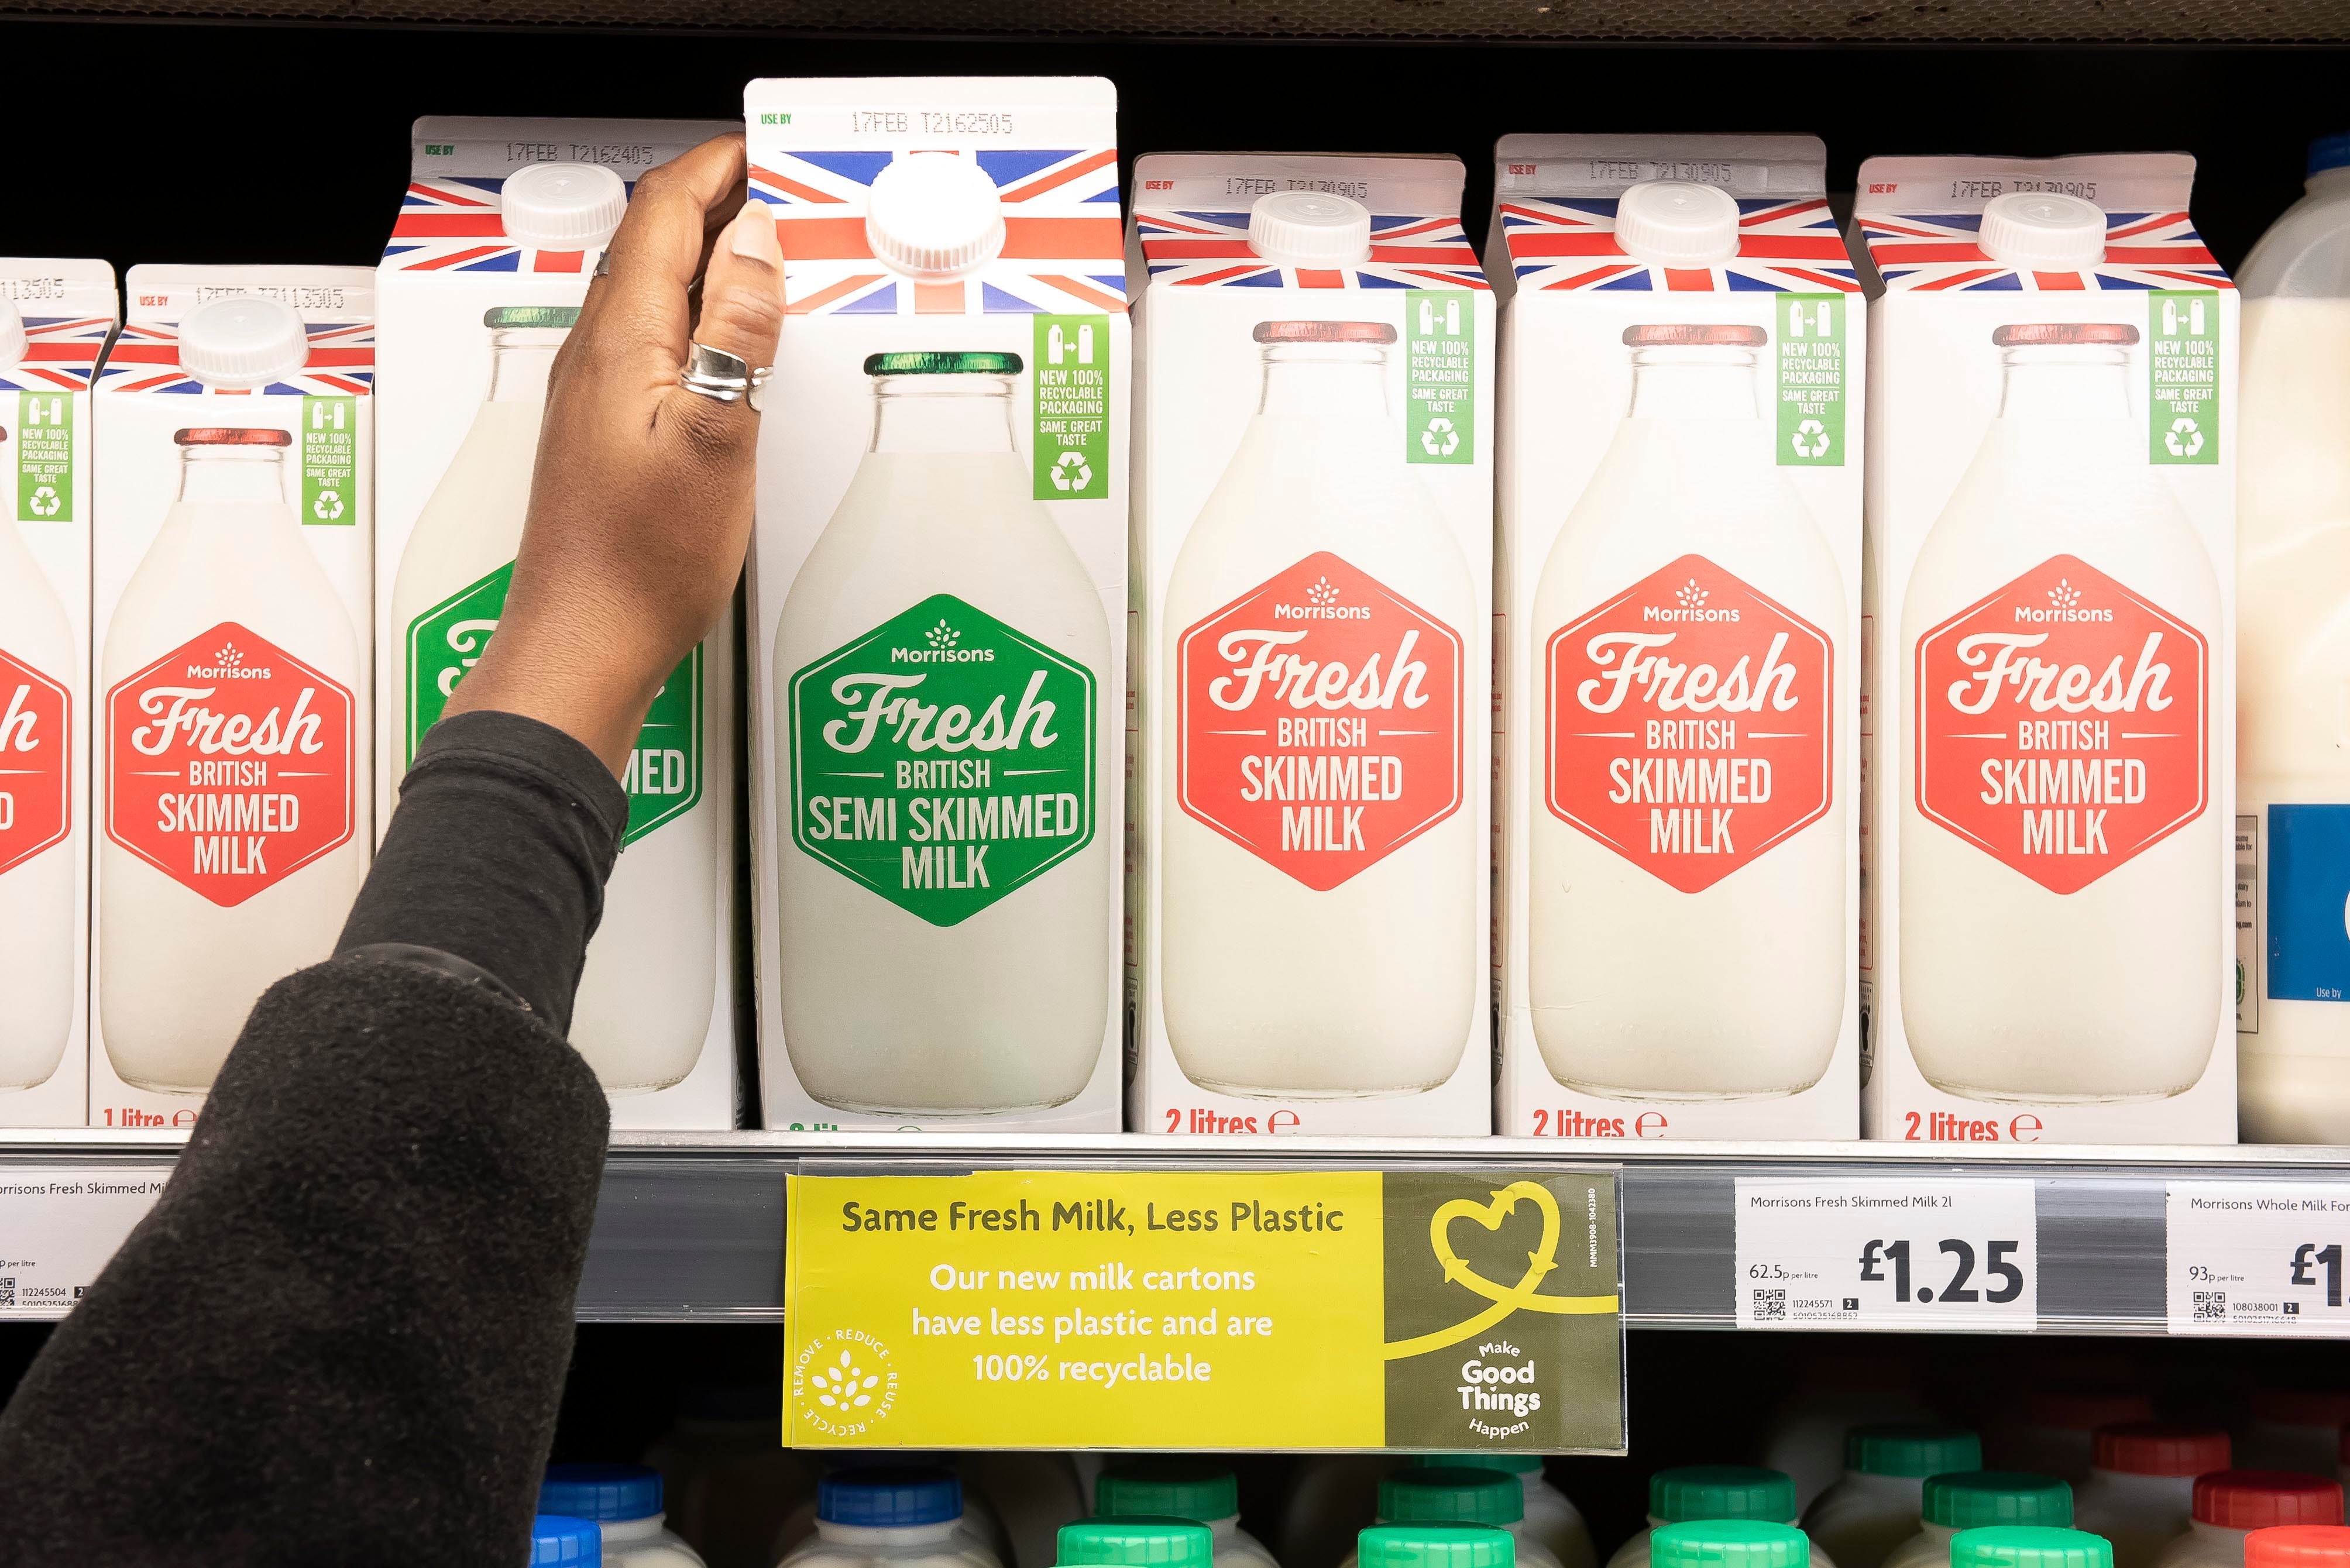 Morrisons is selling its own-brand fresh milk in accredited carbon neutral Tetra Pak cartons in what it claims is a first among UK supermarkets (Morrisons/PA)